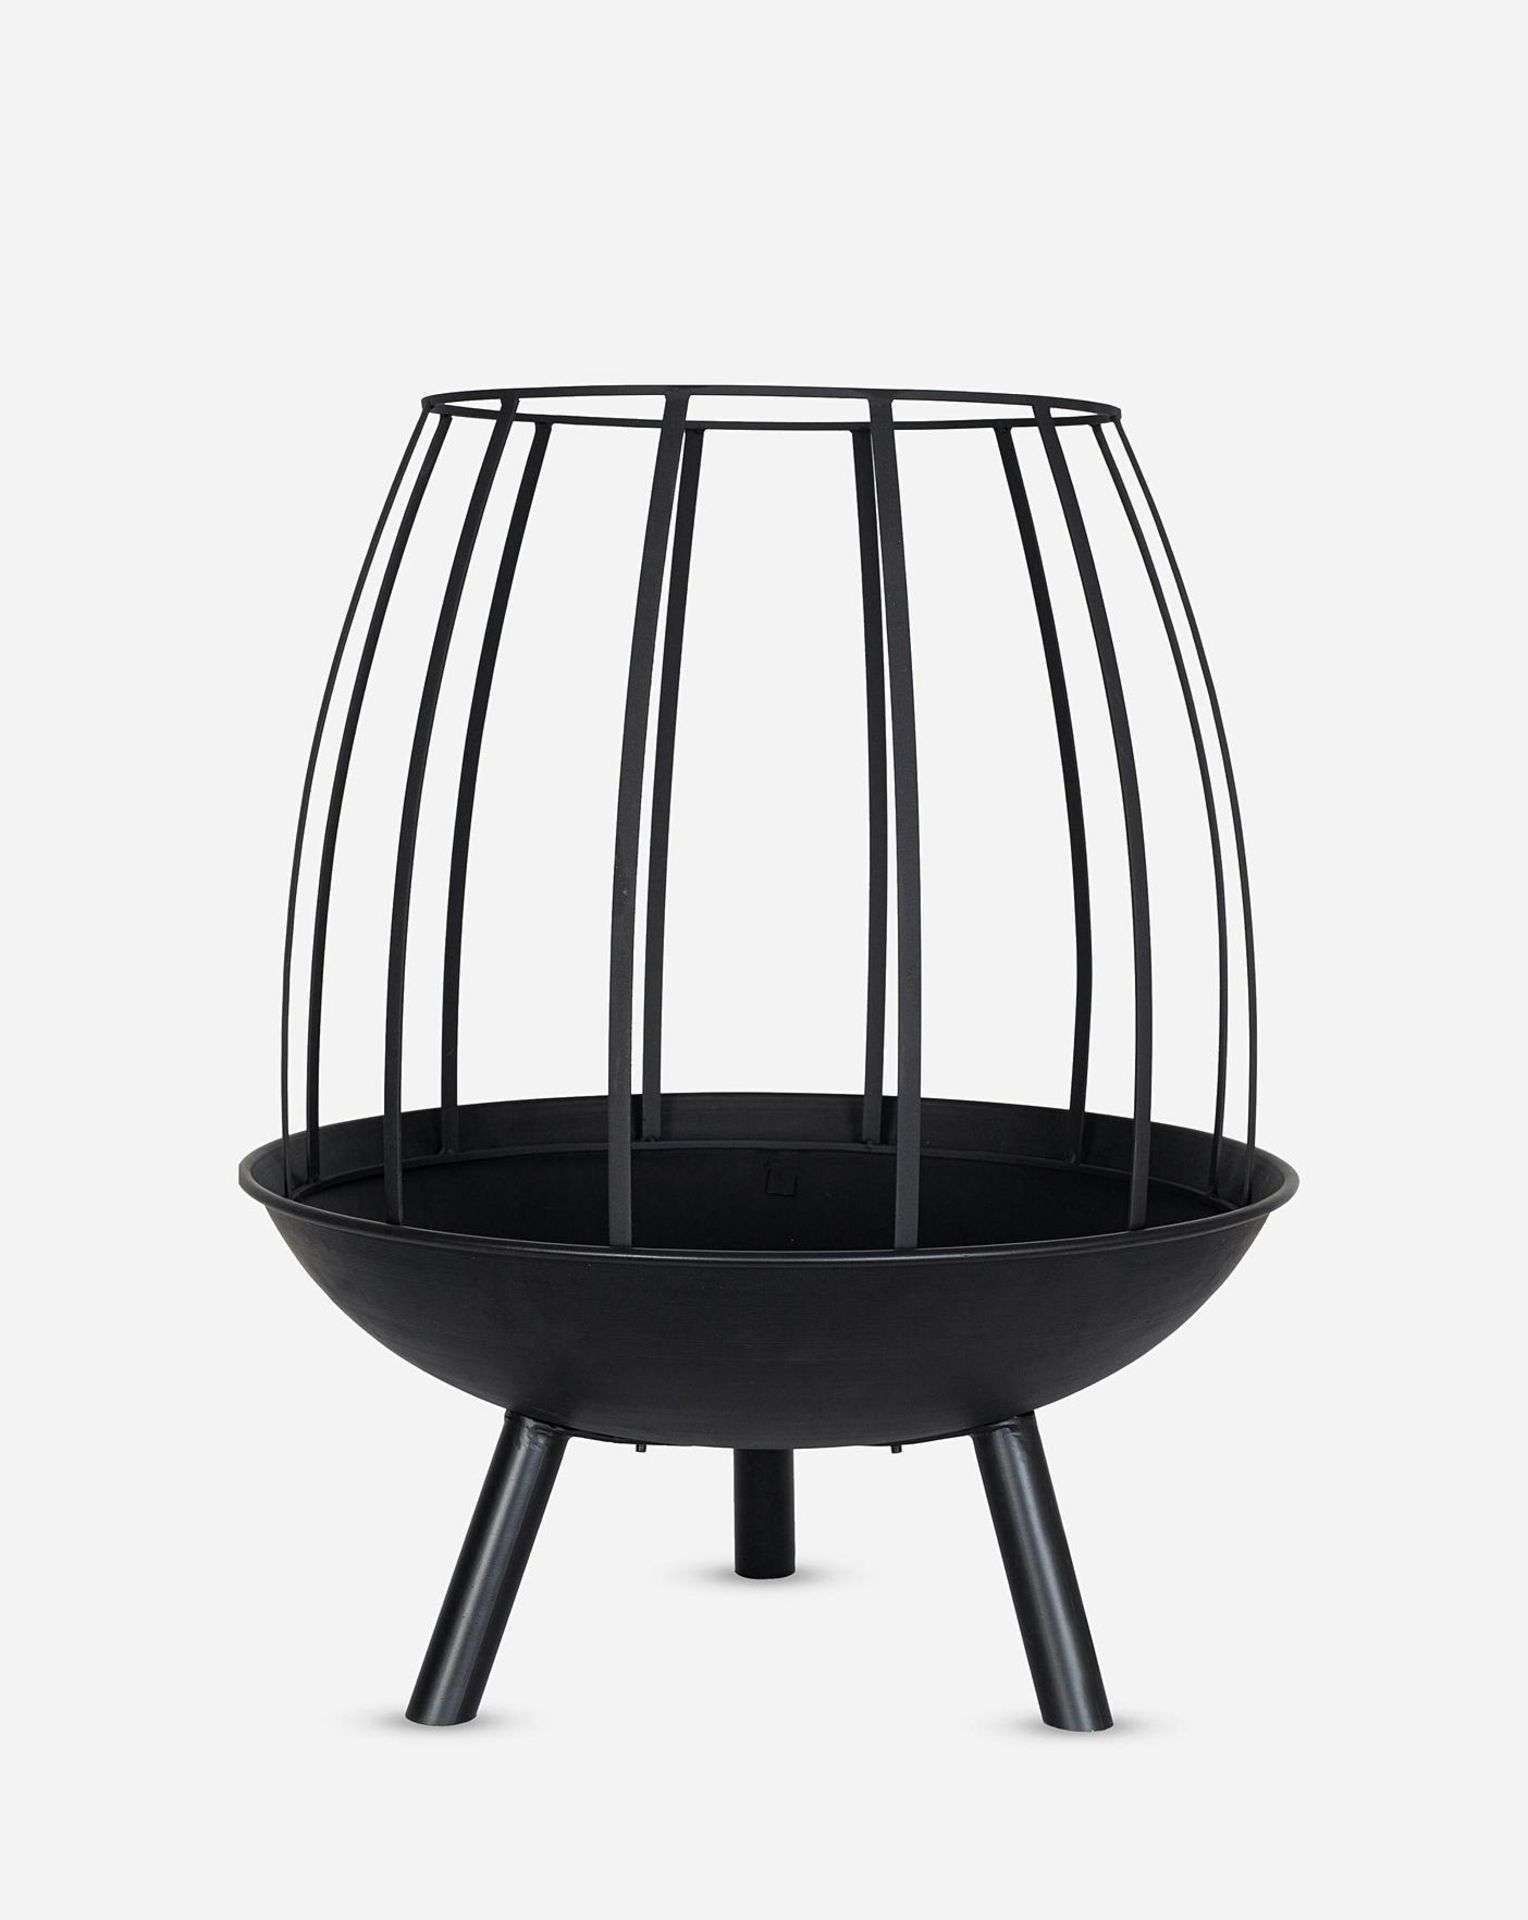 Brand New La Hacienda Large Steel Firepit with Pedestal Stand RRP £149 R9.10, Add style to your